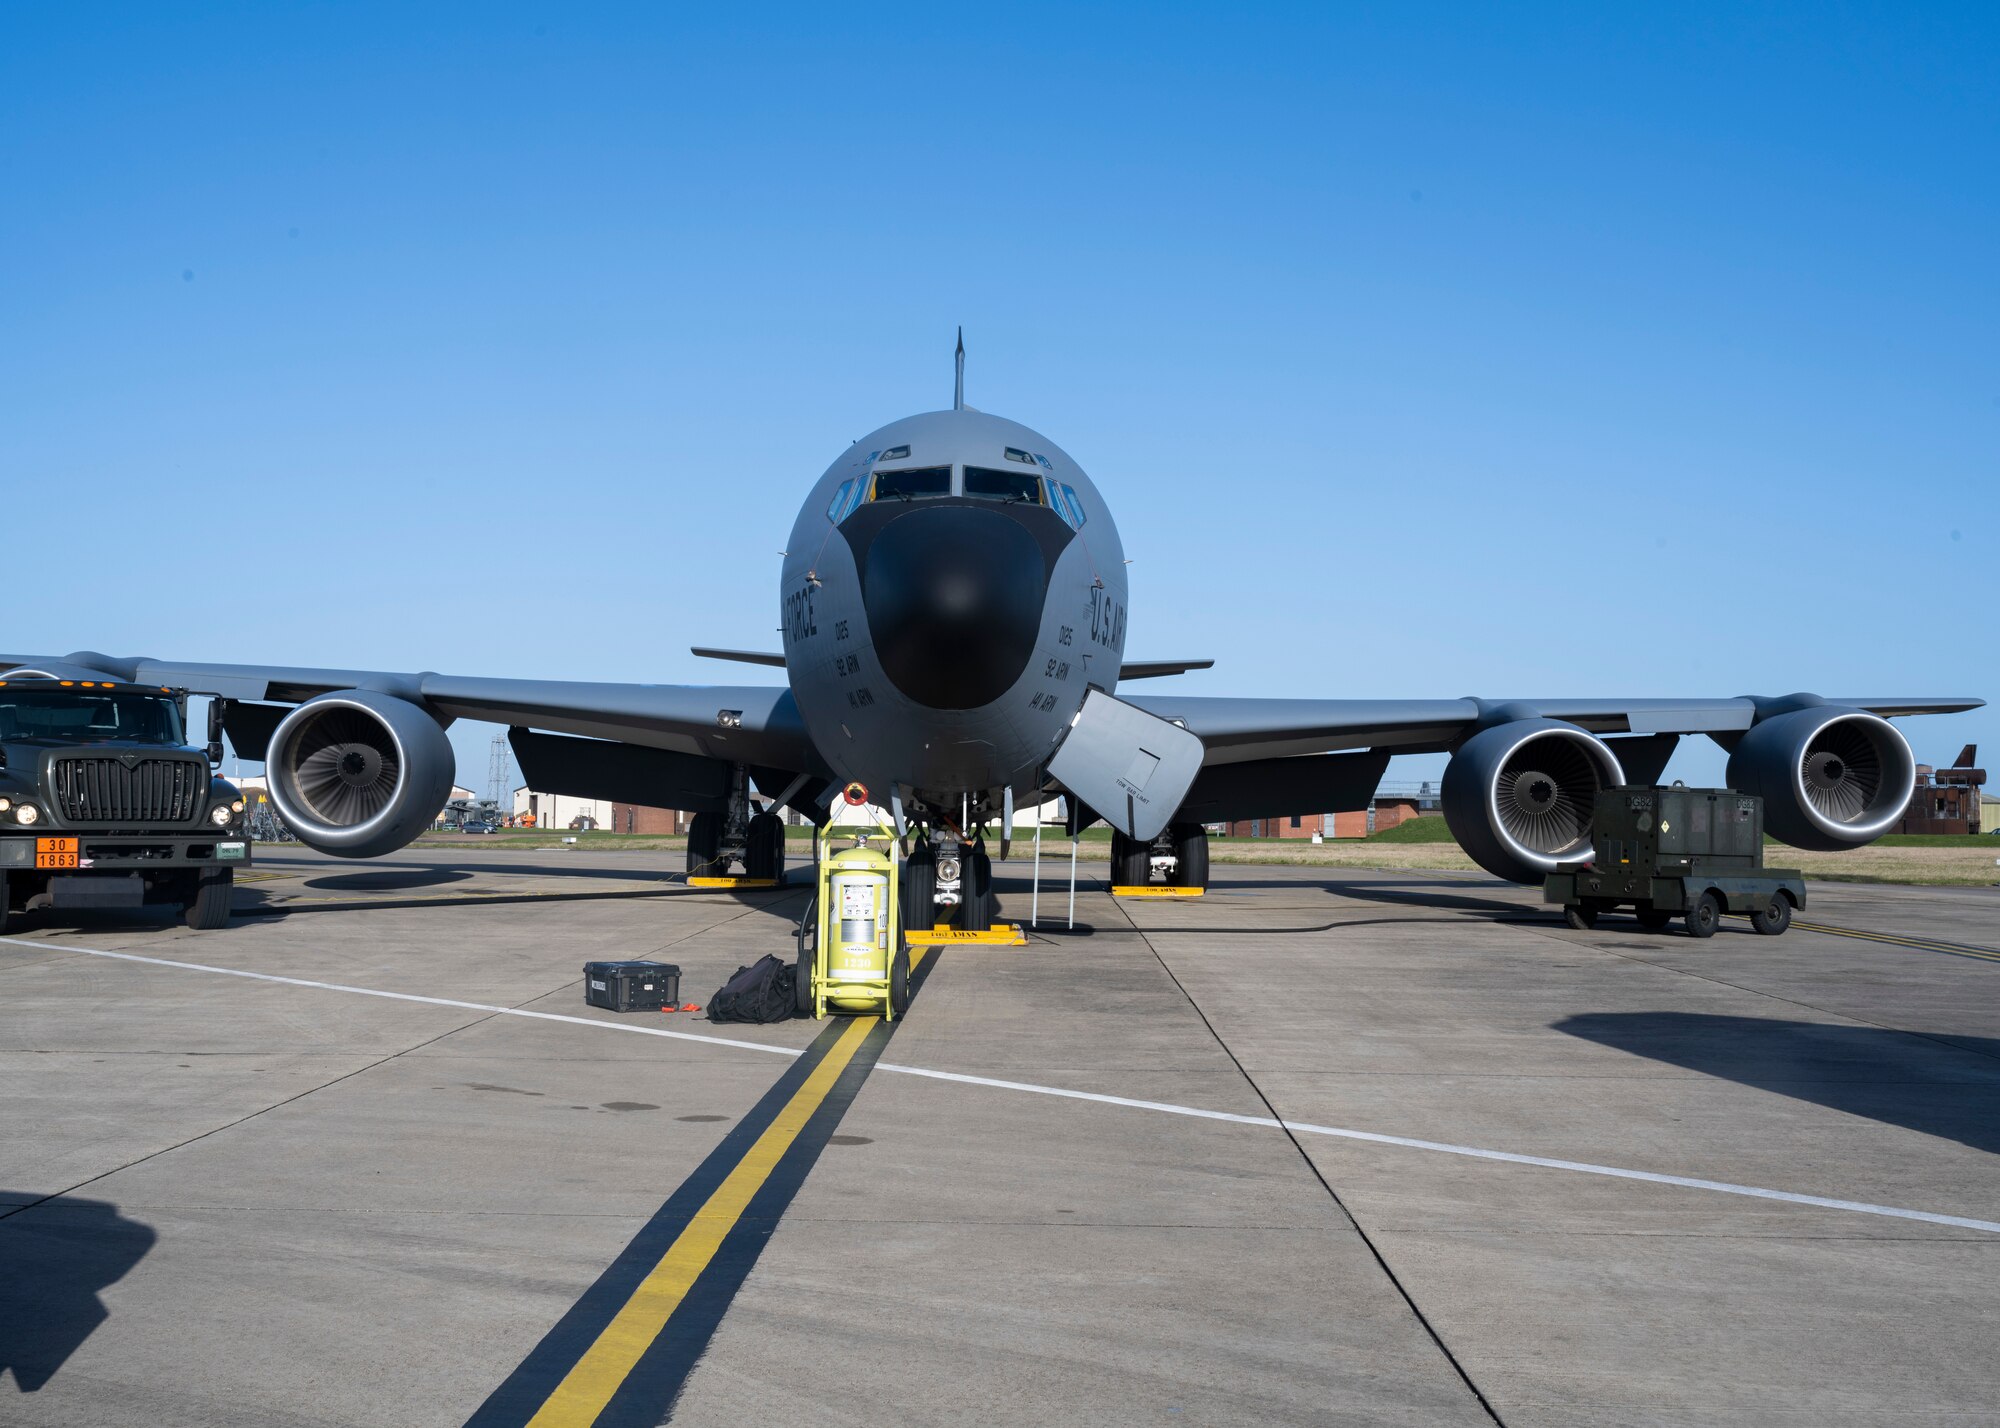 The 100th ARW is the only permanent U.S. air refueling wing in the European theater that provides critical air refueling support that allows the Expeditionary Air Force to deploy around the globe on a moment’s notice.